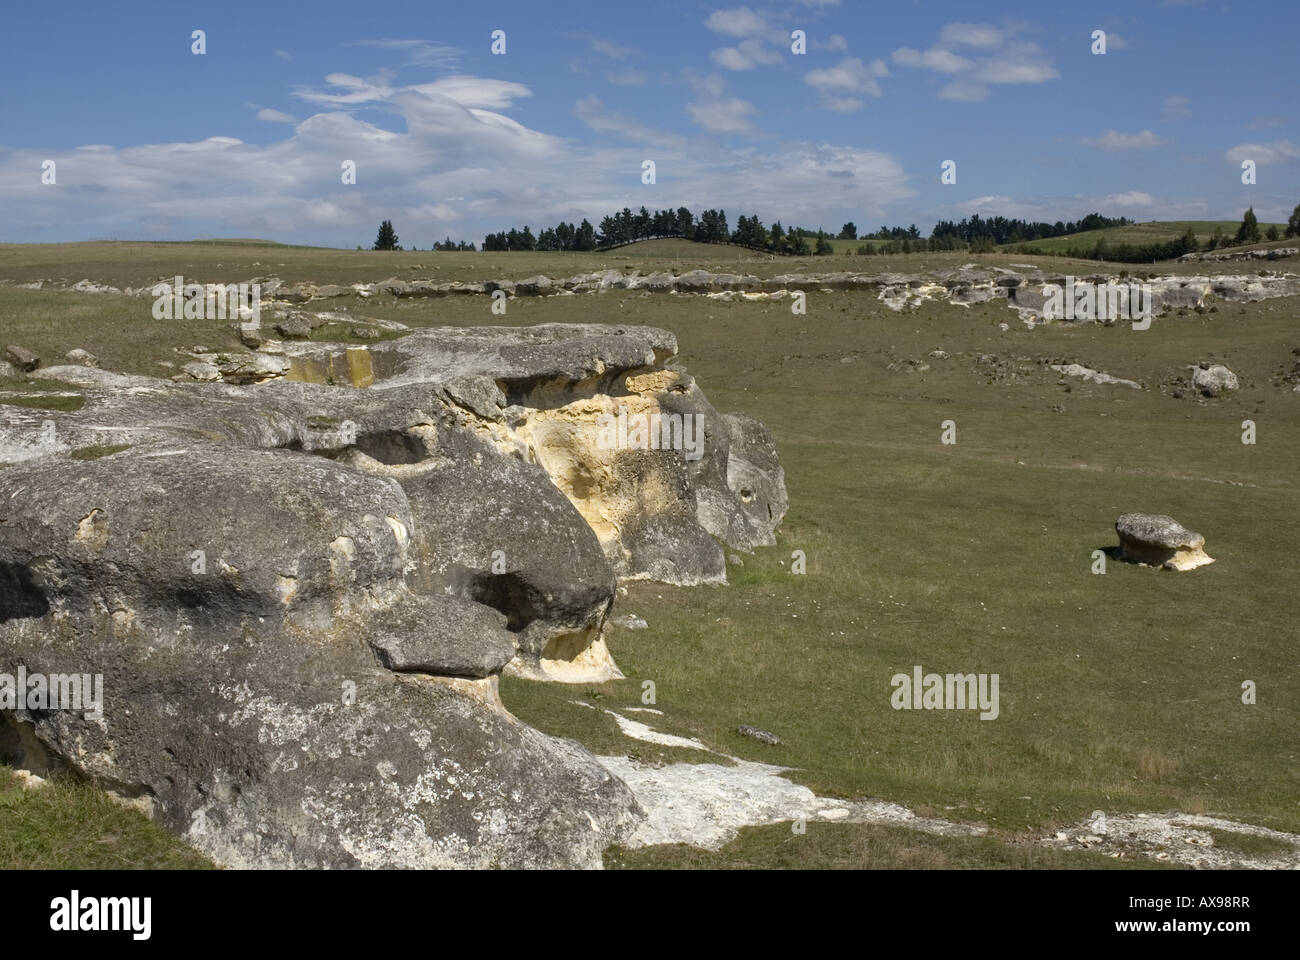 The weird landscape at Elephant Rocks, North Otago in the South Island of New Zealand Stock Photo